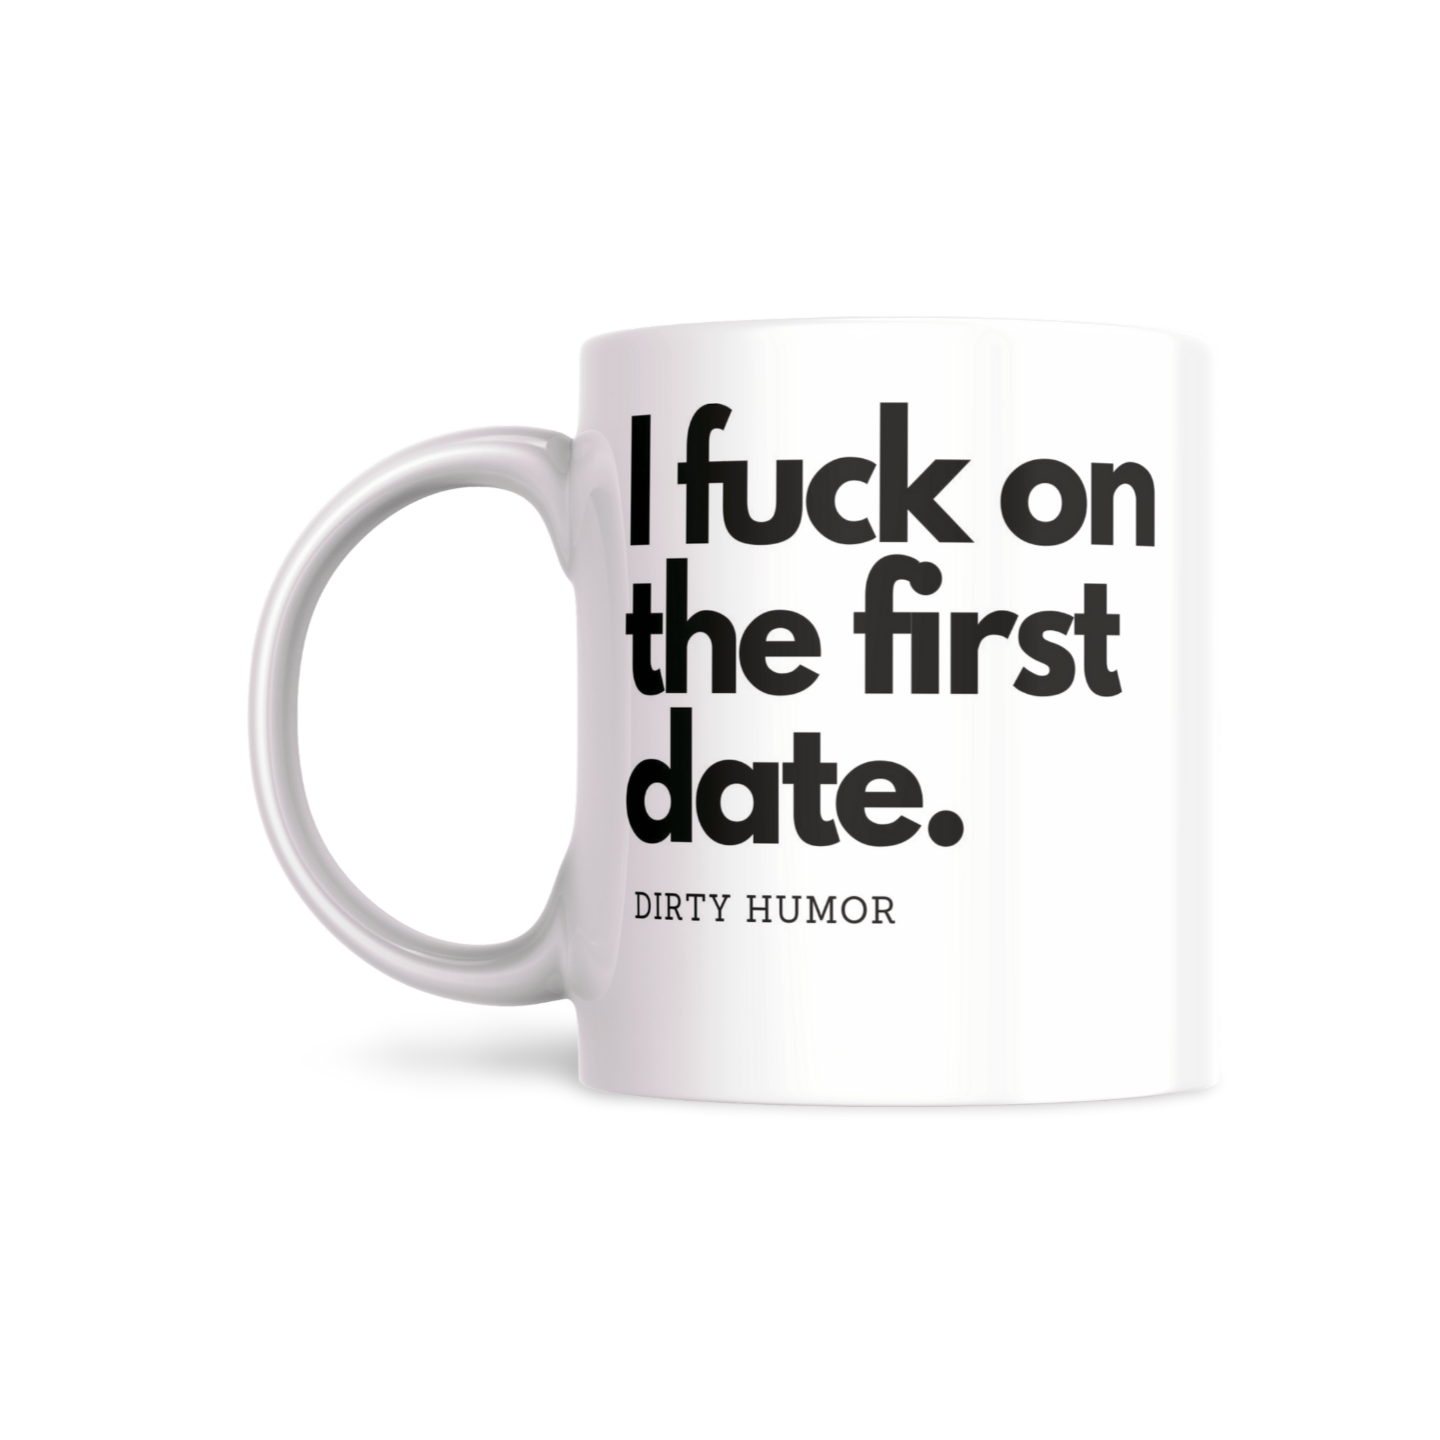 I fuck on the first date.